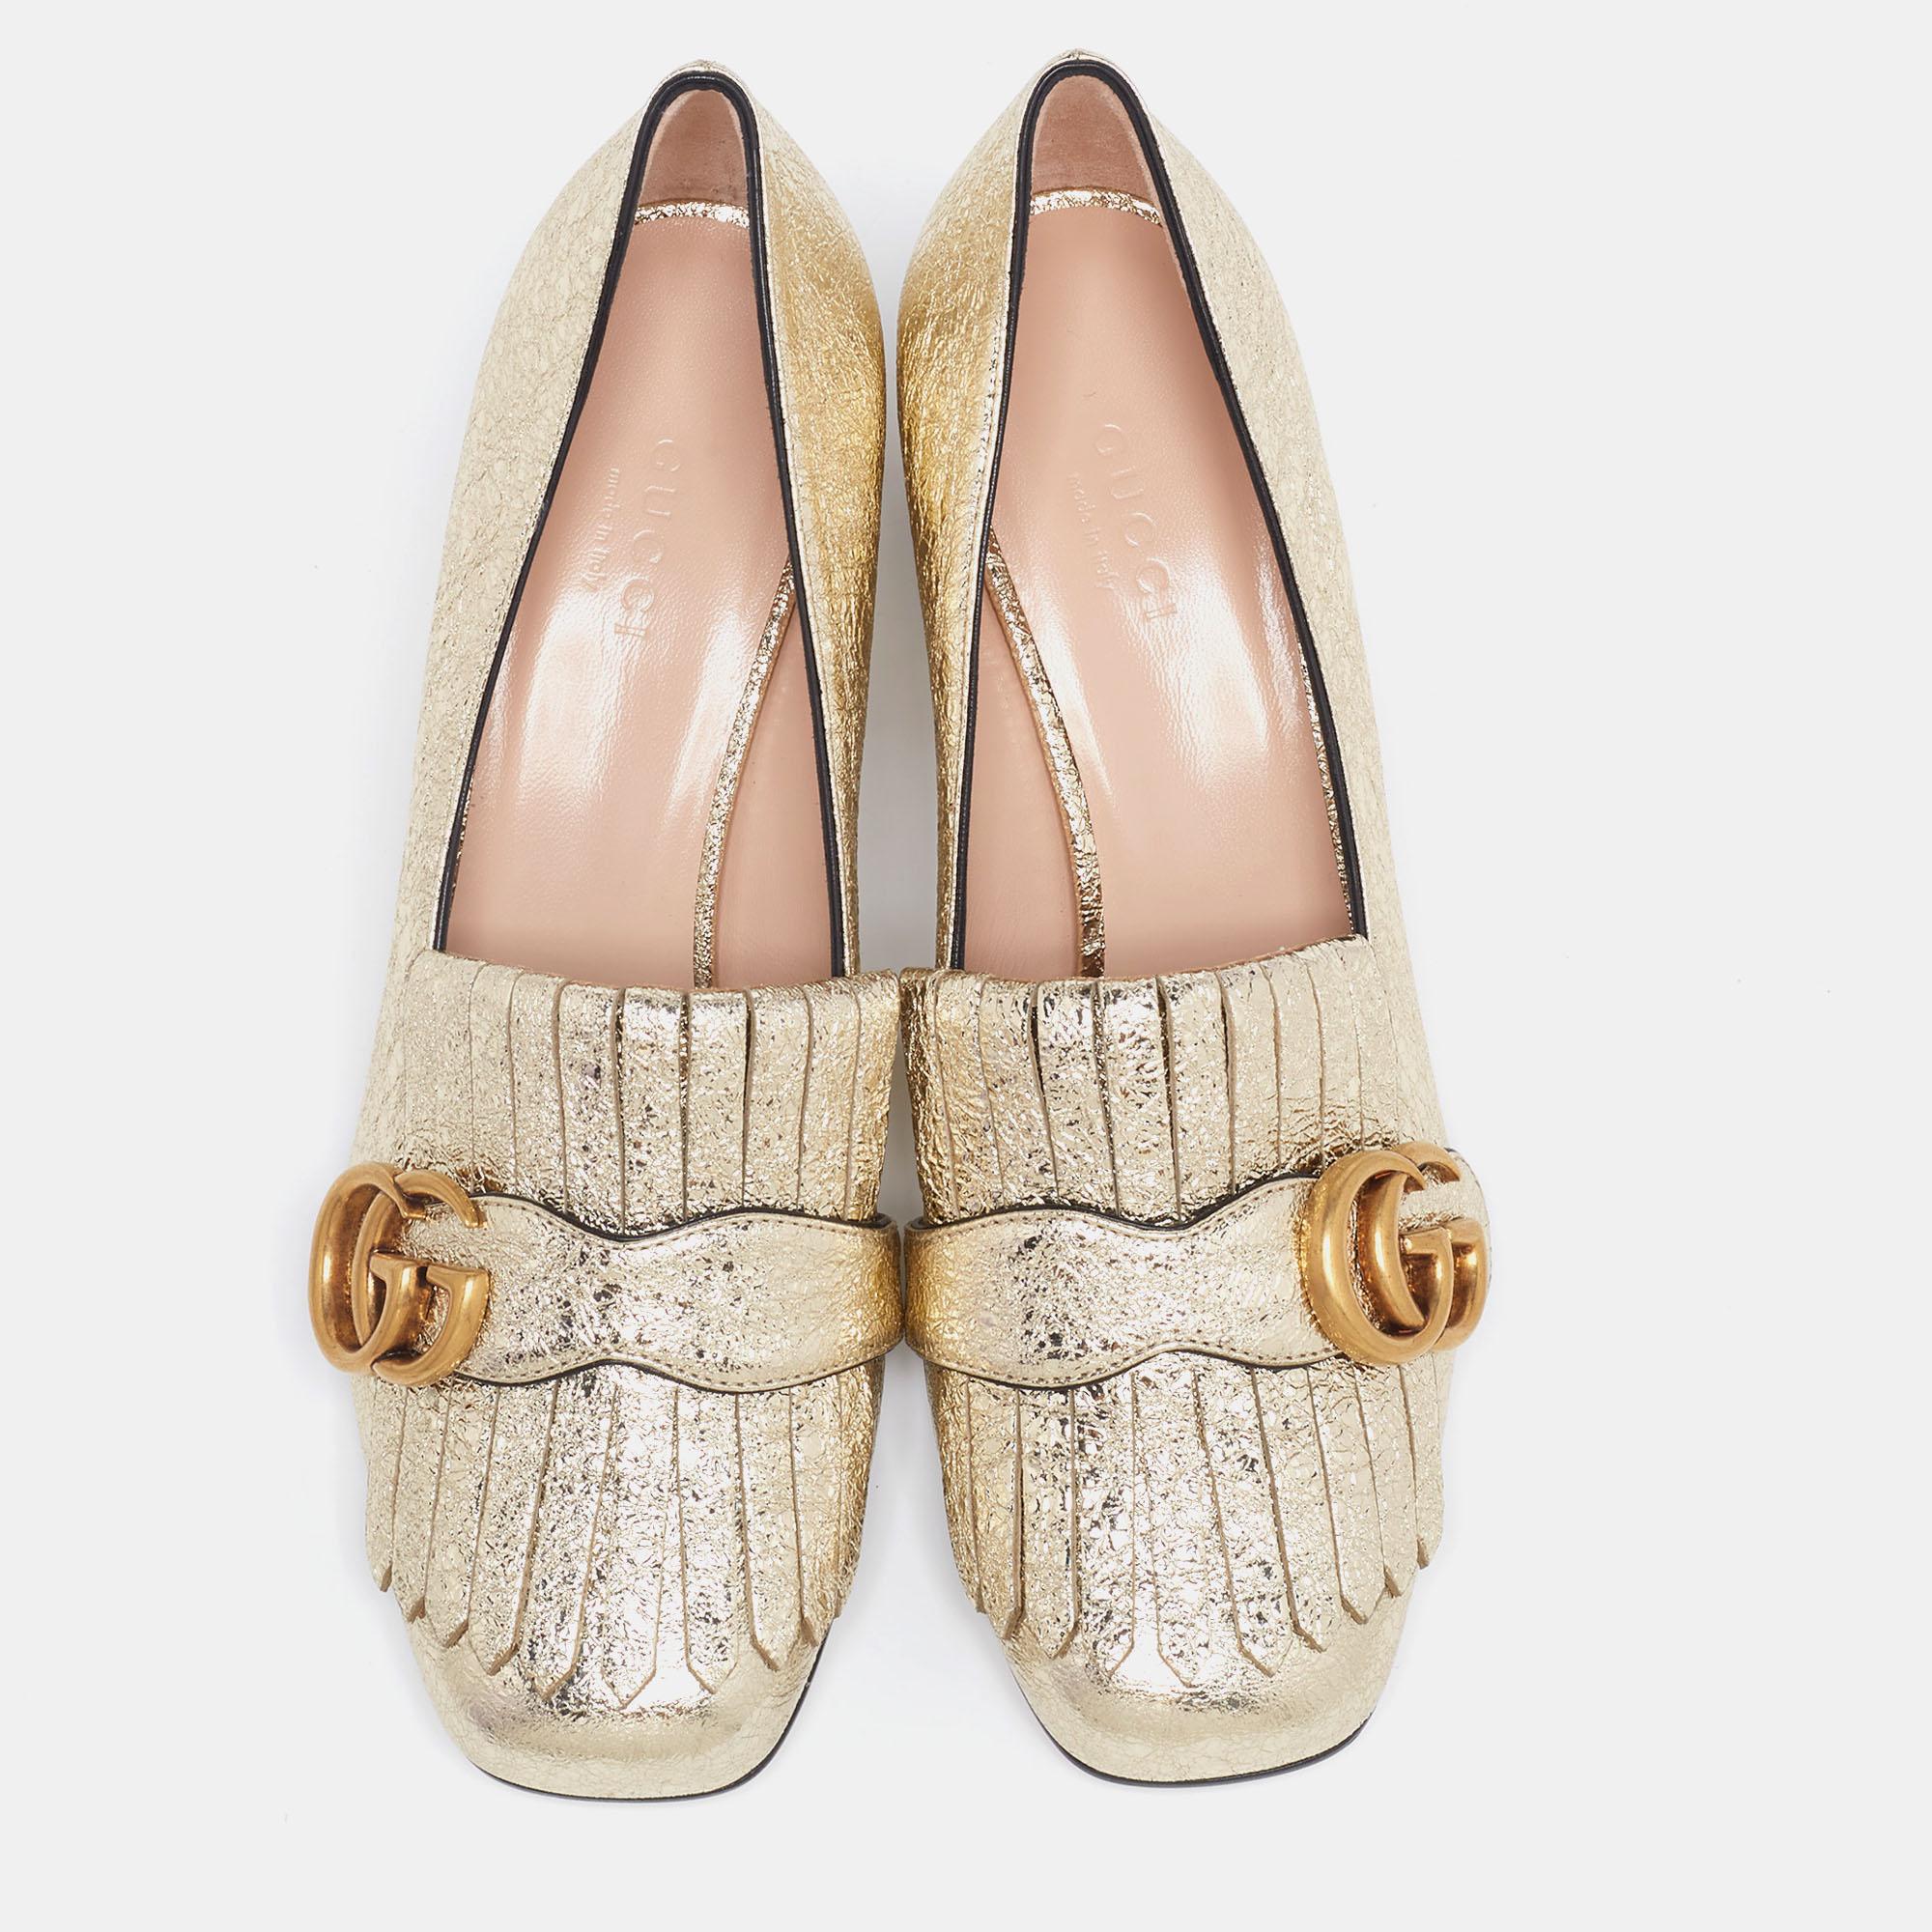 Absolutely on-trend and easy to flaunt, this pair of pumps by Gucci is a true stunner. They've been crafted from crinkled gold leather and styled with folded fringes and the brand's signature GG on the uppers. Square toes and a set of block heels